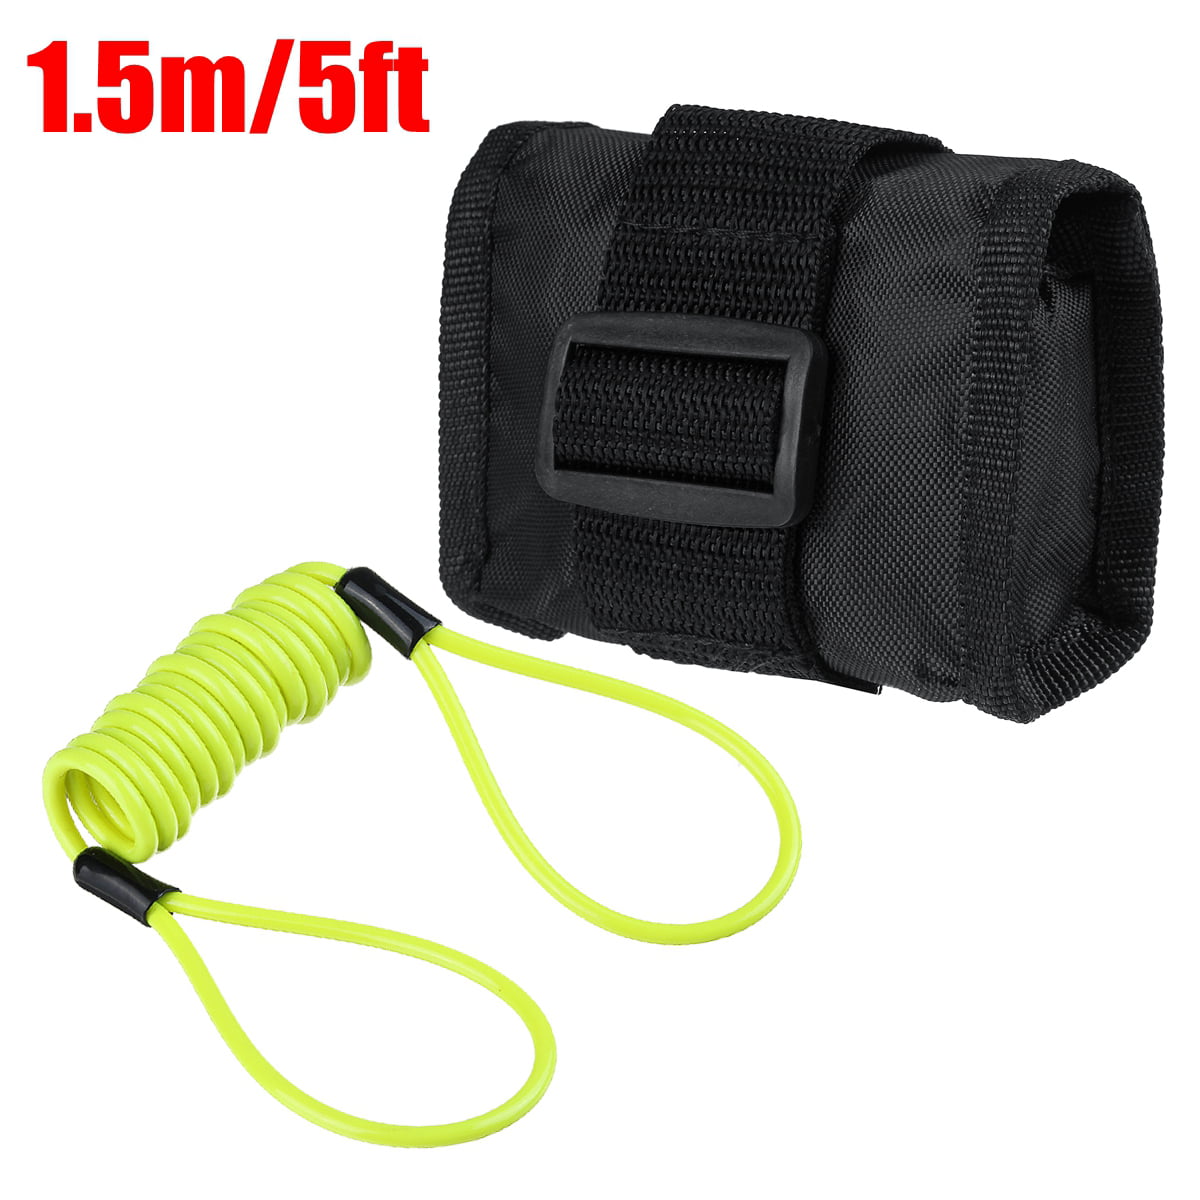 1.5m/5ft Reminder Cable Alarm Lock Bag For Motorcycle Motorbike Sport Scooter 